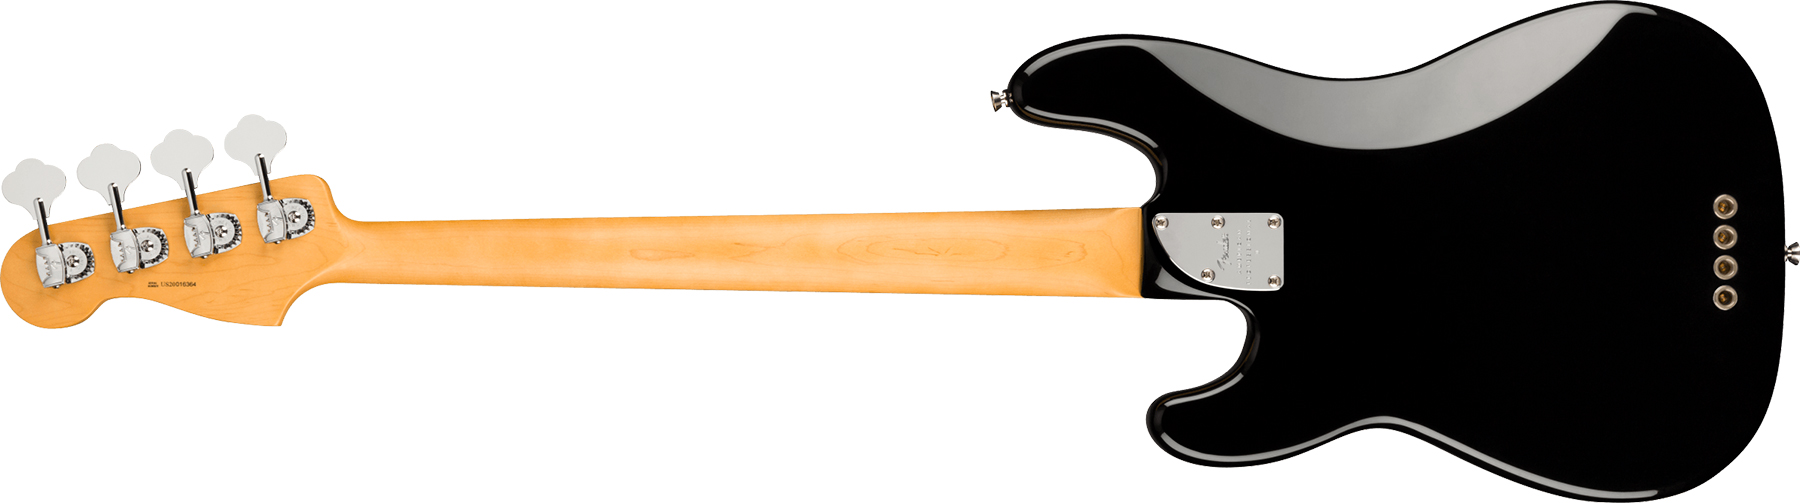 Fender Precision Bass American Professional Ii Usa Mn - Black - Solid body electric bass - Variation 1